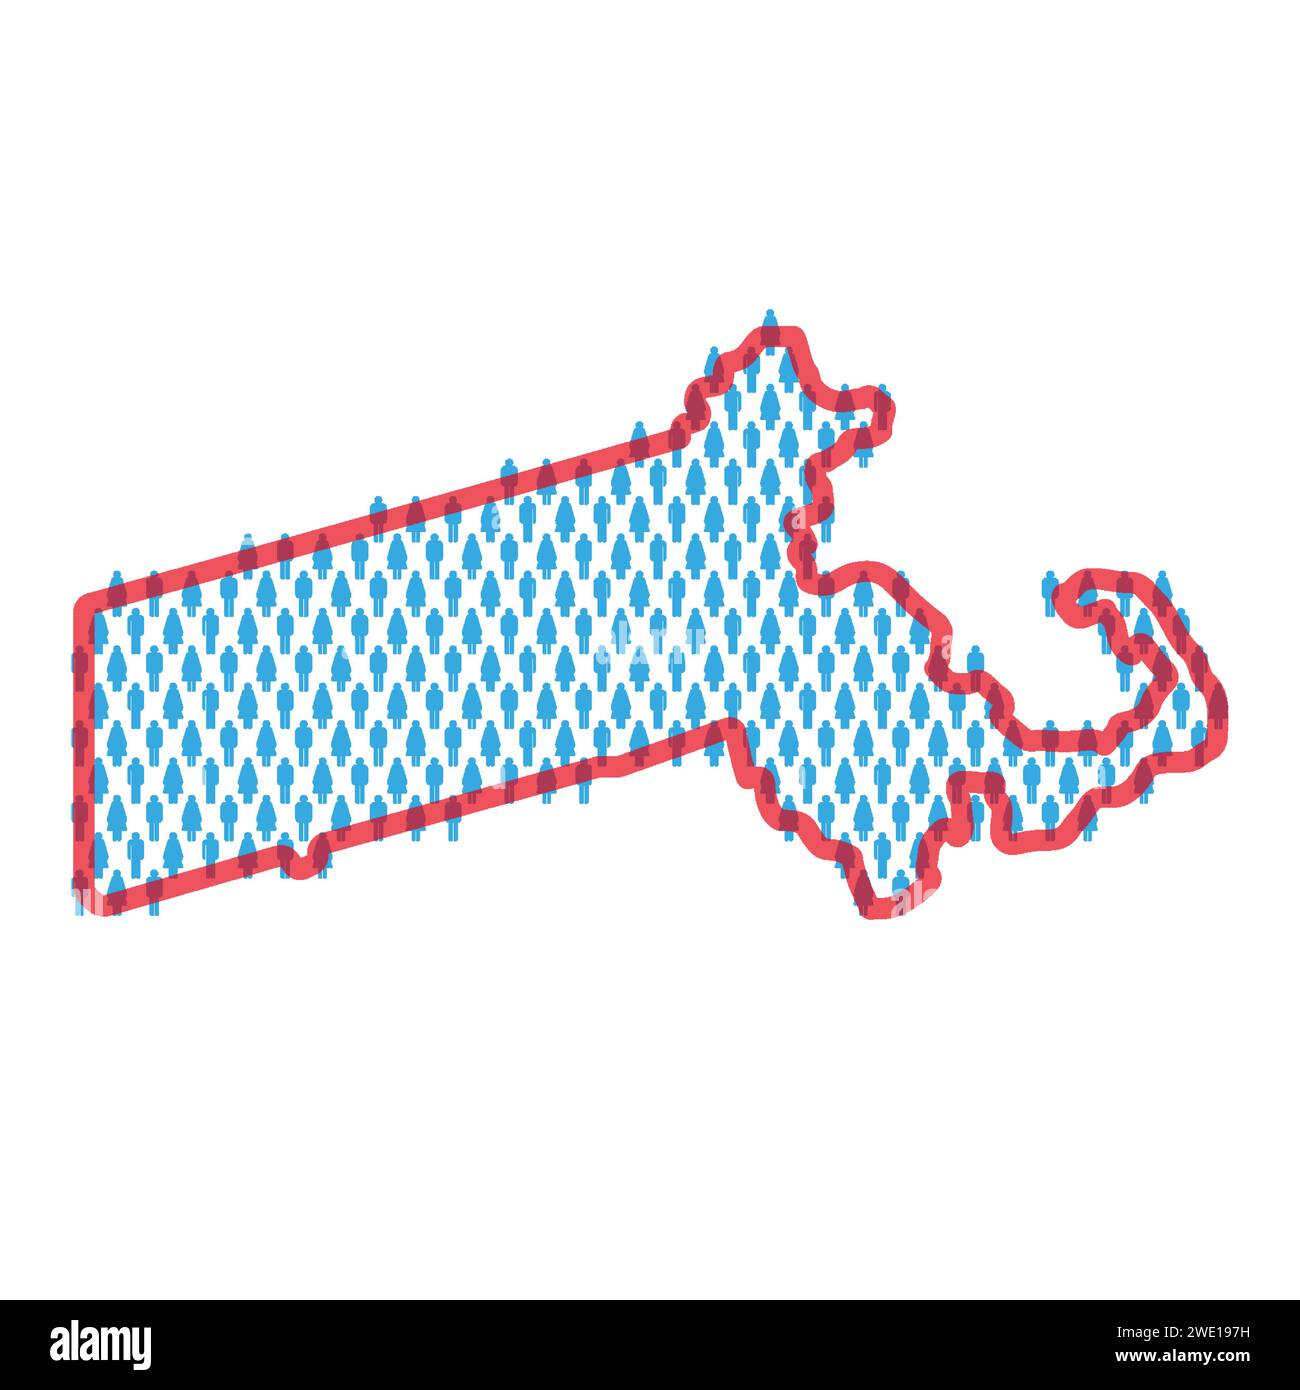 Massachusetts population map. Stick figures people map with bold red translucent state border. Pattern of men and women icons. Isolated vector illustr Stock Vector